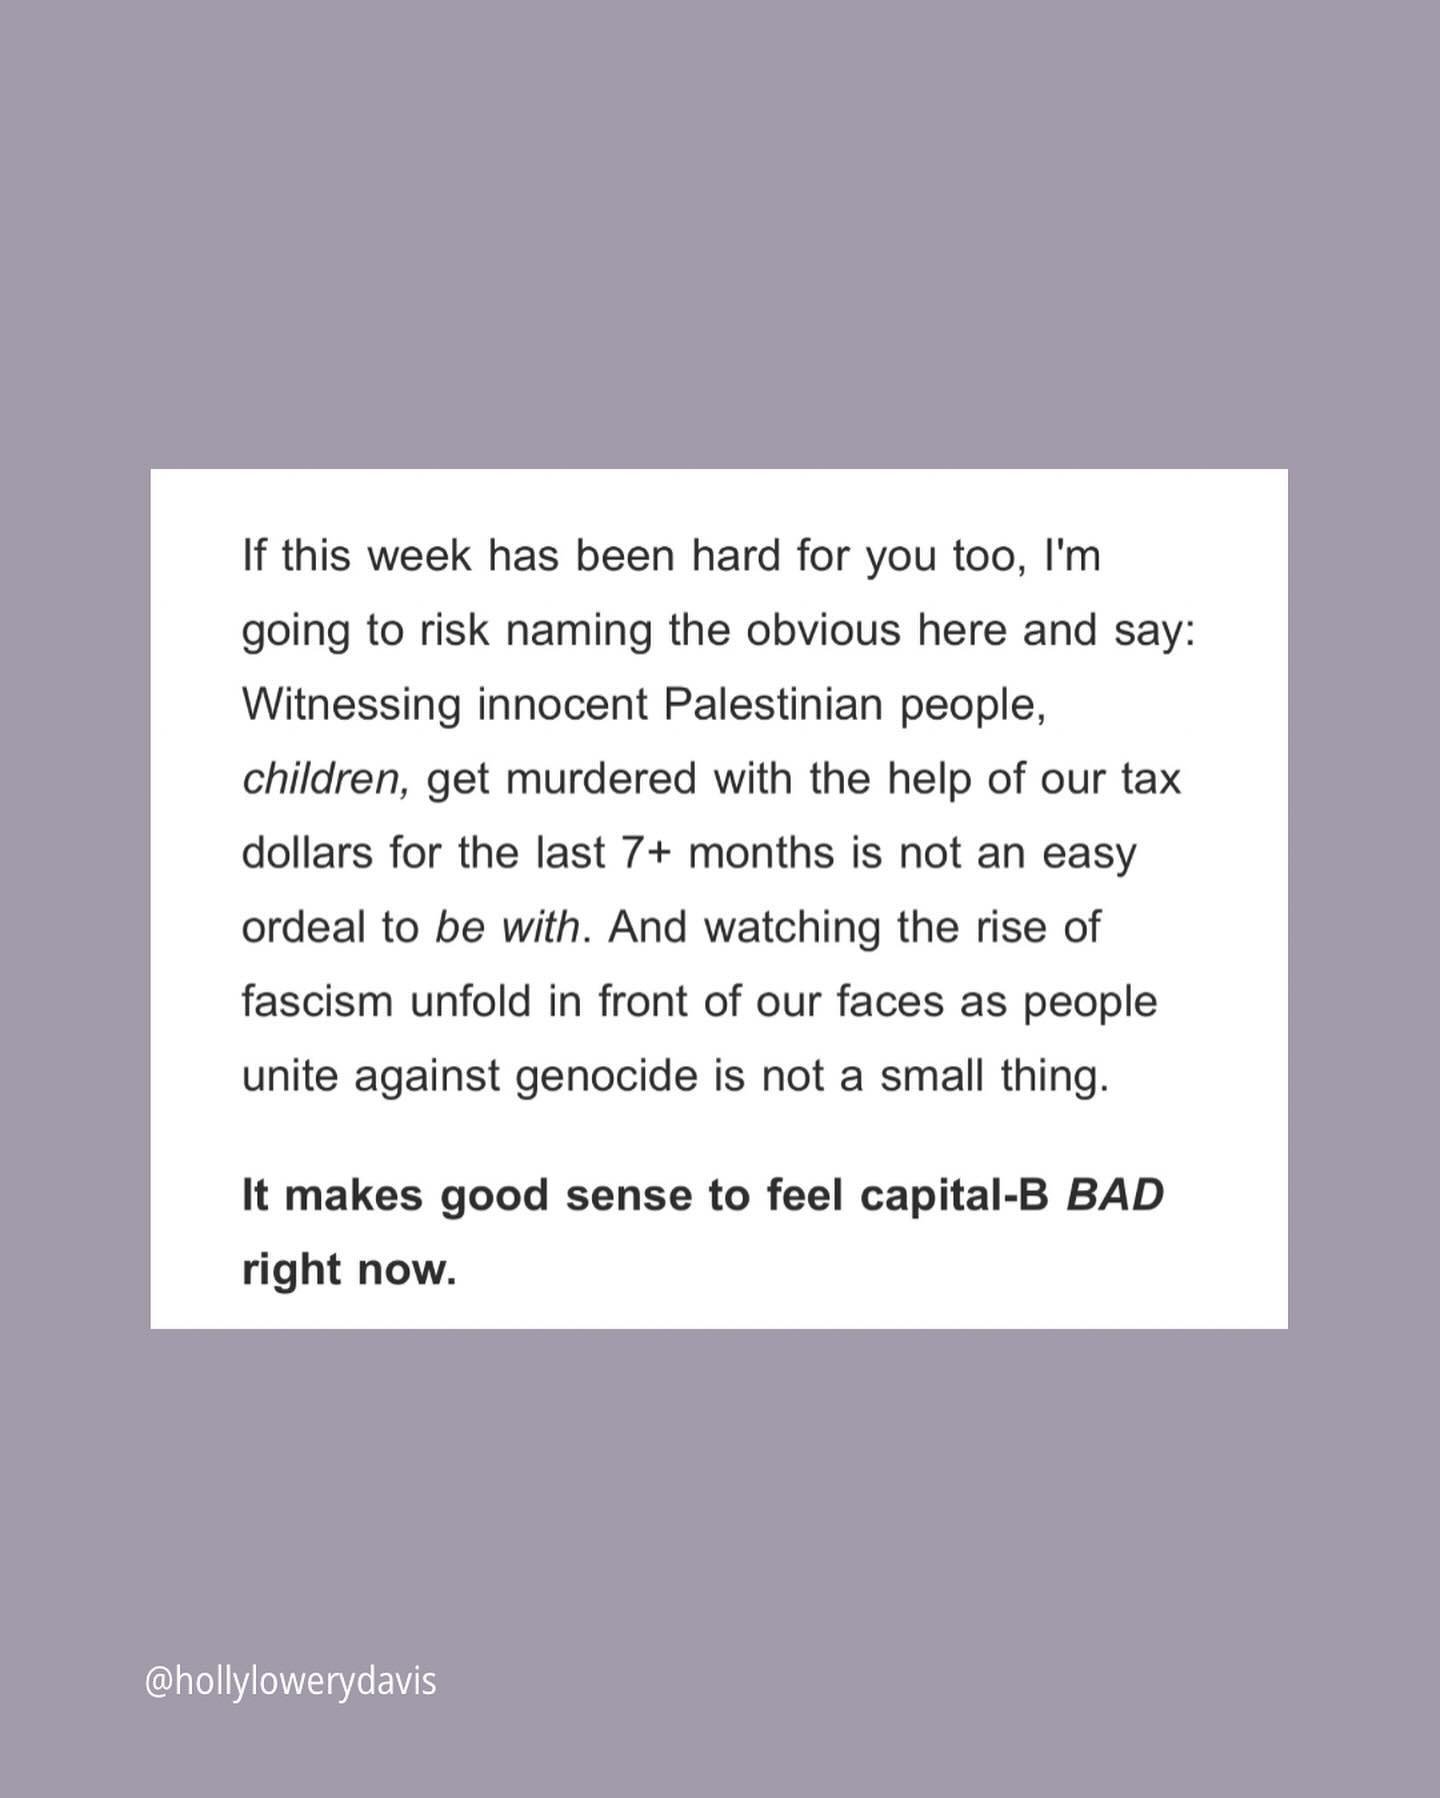 Little bits from today&rsquo;s newsletter. Check your inbox for the full gambit. Subscribe if you&rsquo;re not already 🖤 (link in bio)

Stay soft &amp; strong. Our collective liberation depends on that.

#somatics #freepalestine #somatichealing #ner